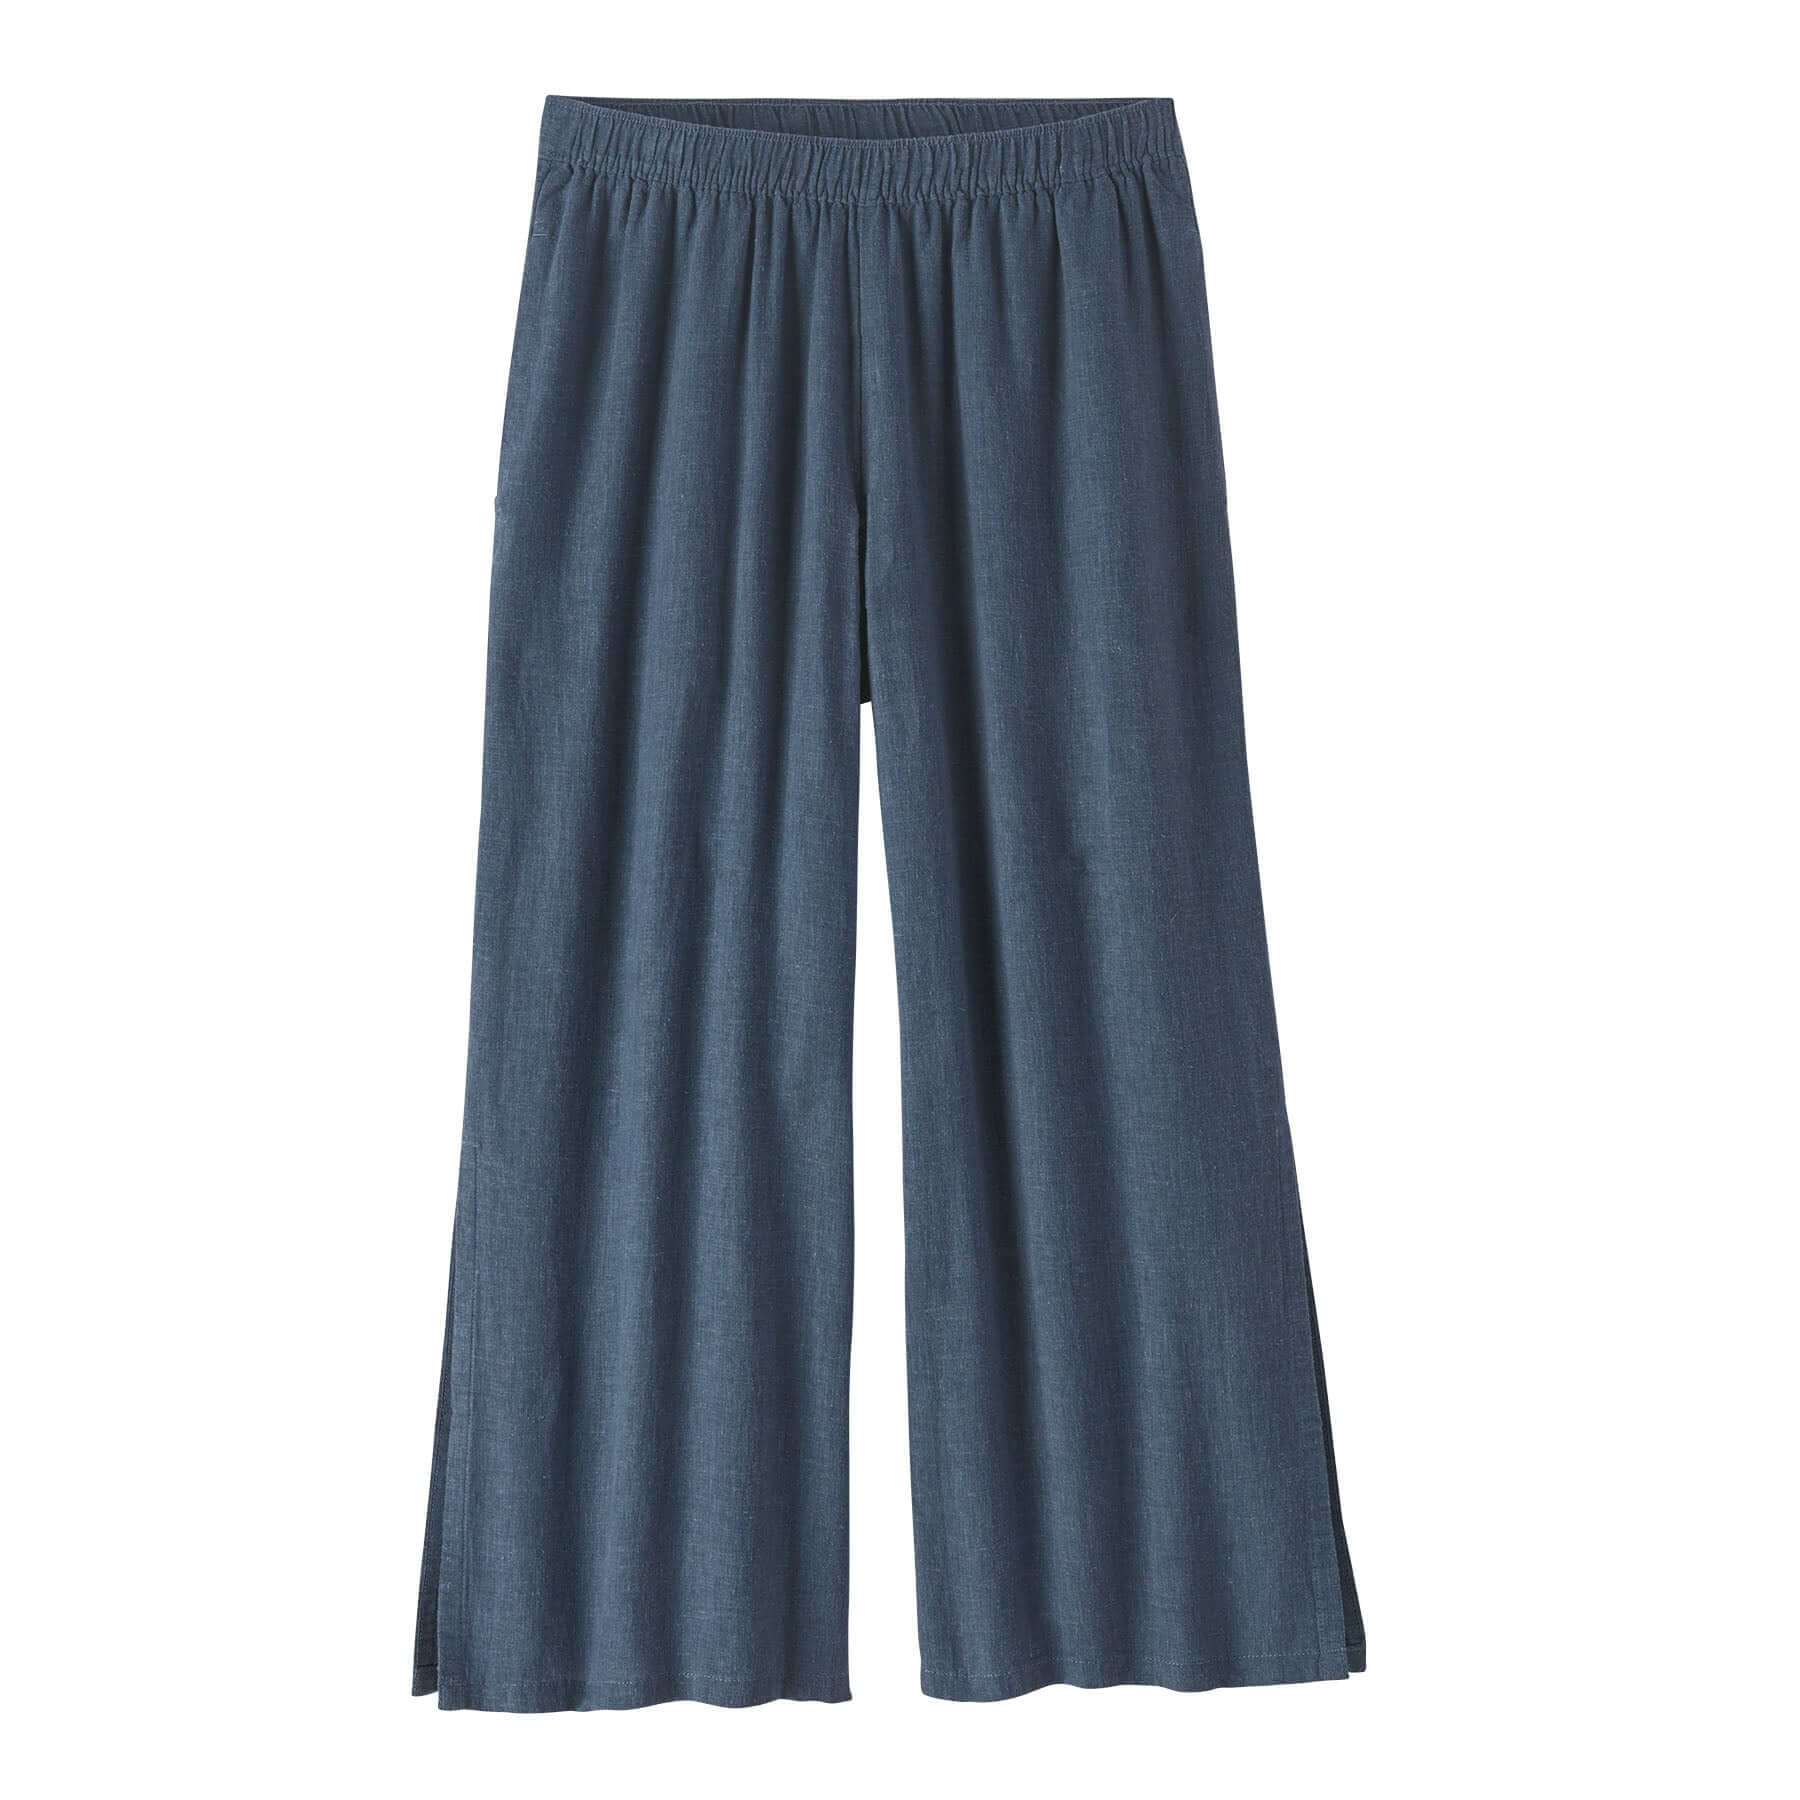 Women's Garden Island Pants in Whole Weave: Utility Blue | Patagonia Bend